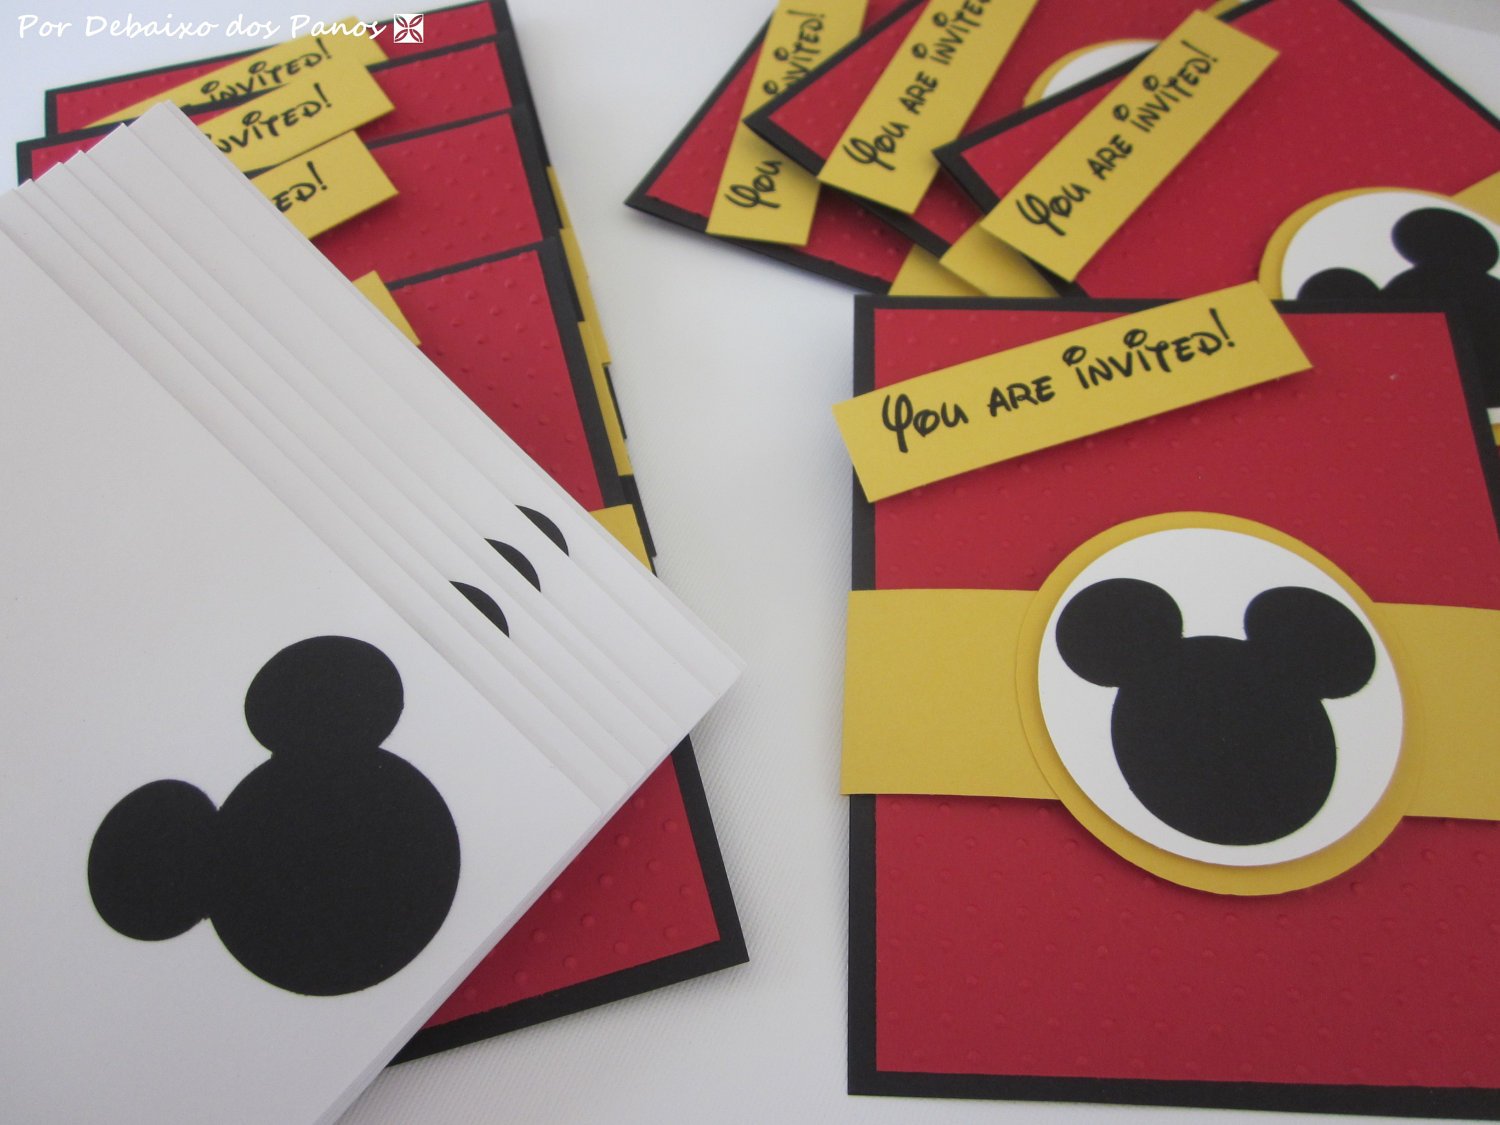 1000+ Images About Invitaciones De Micky Mouse On Pinterest